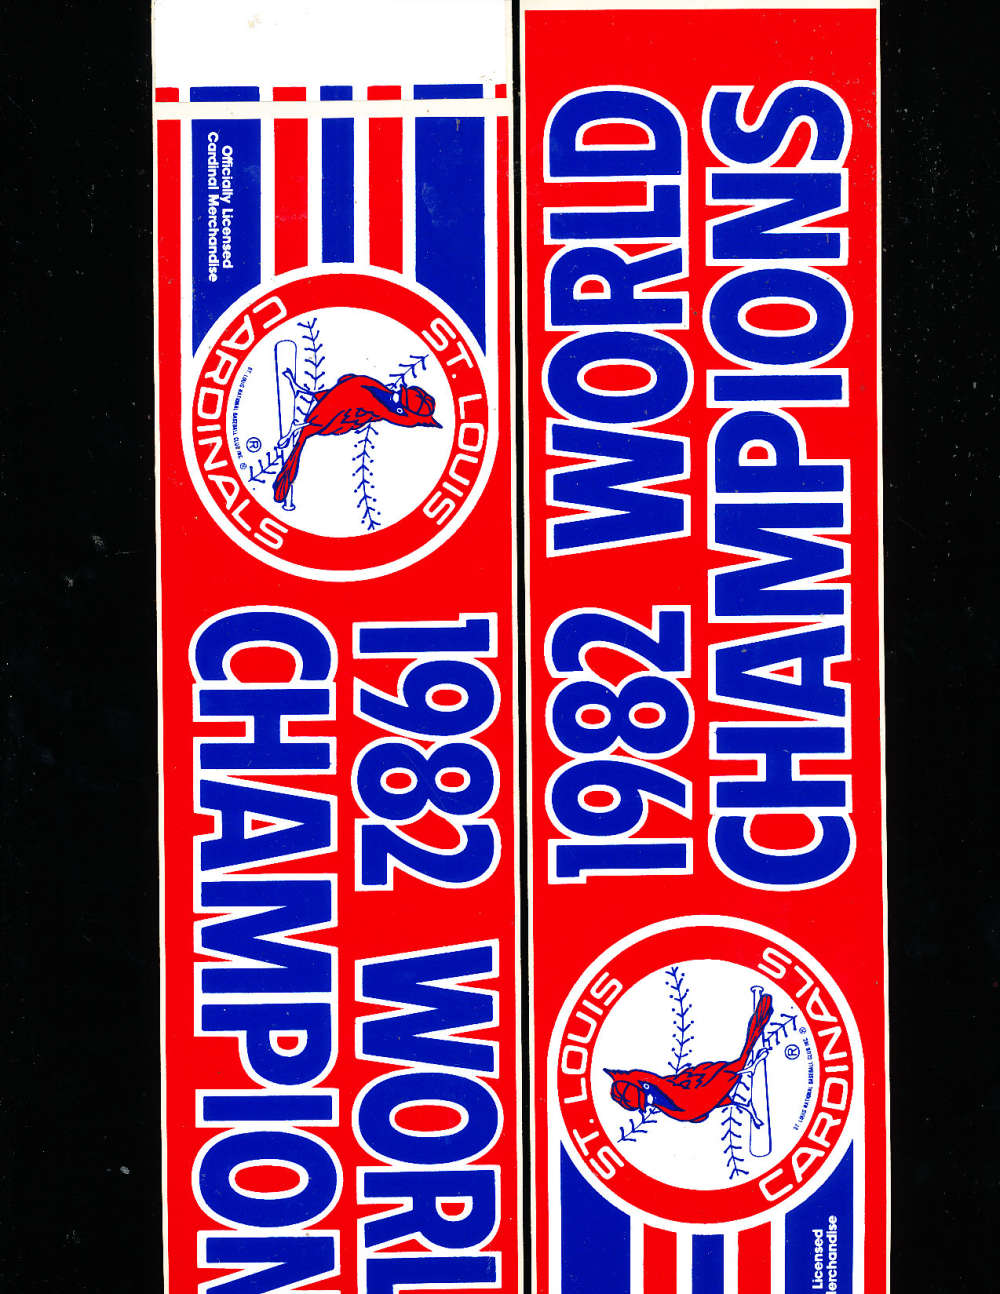 1982 St. Louis Cardinals World Champions bumper sticker bx1 (only one listed)